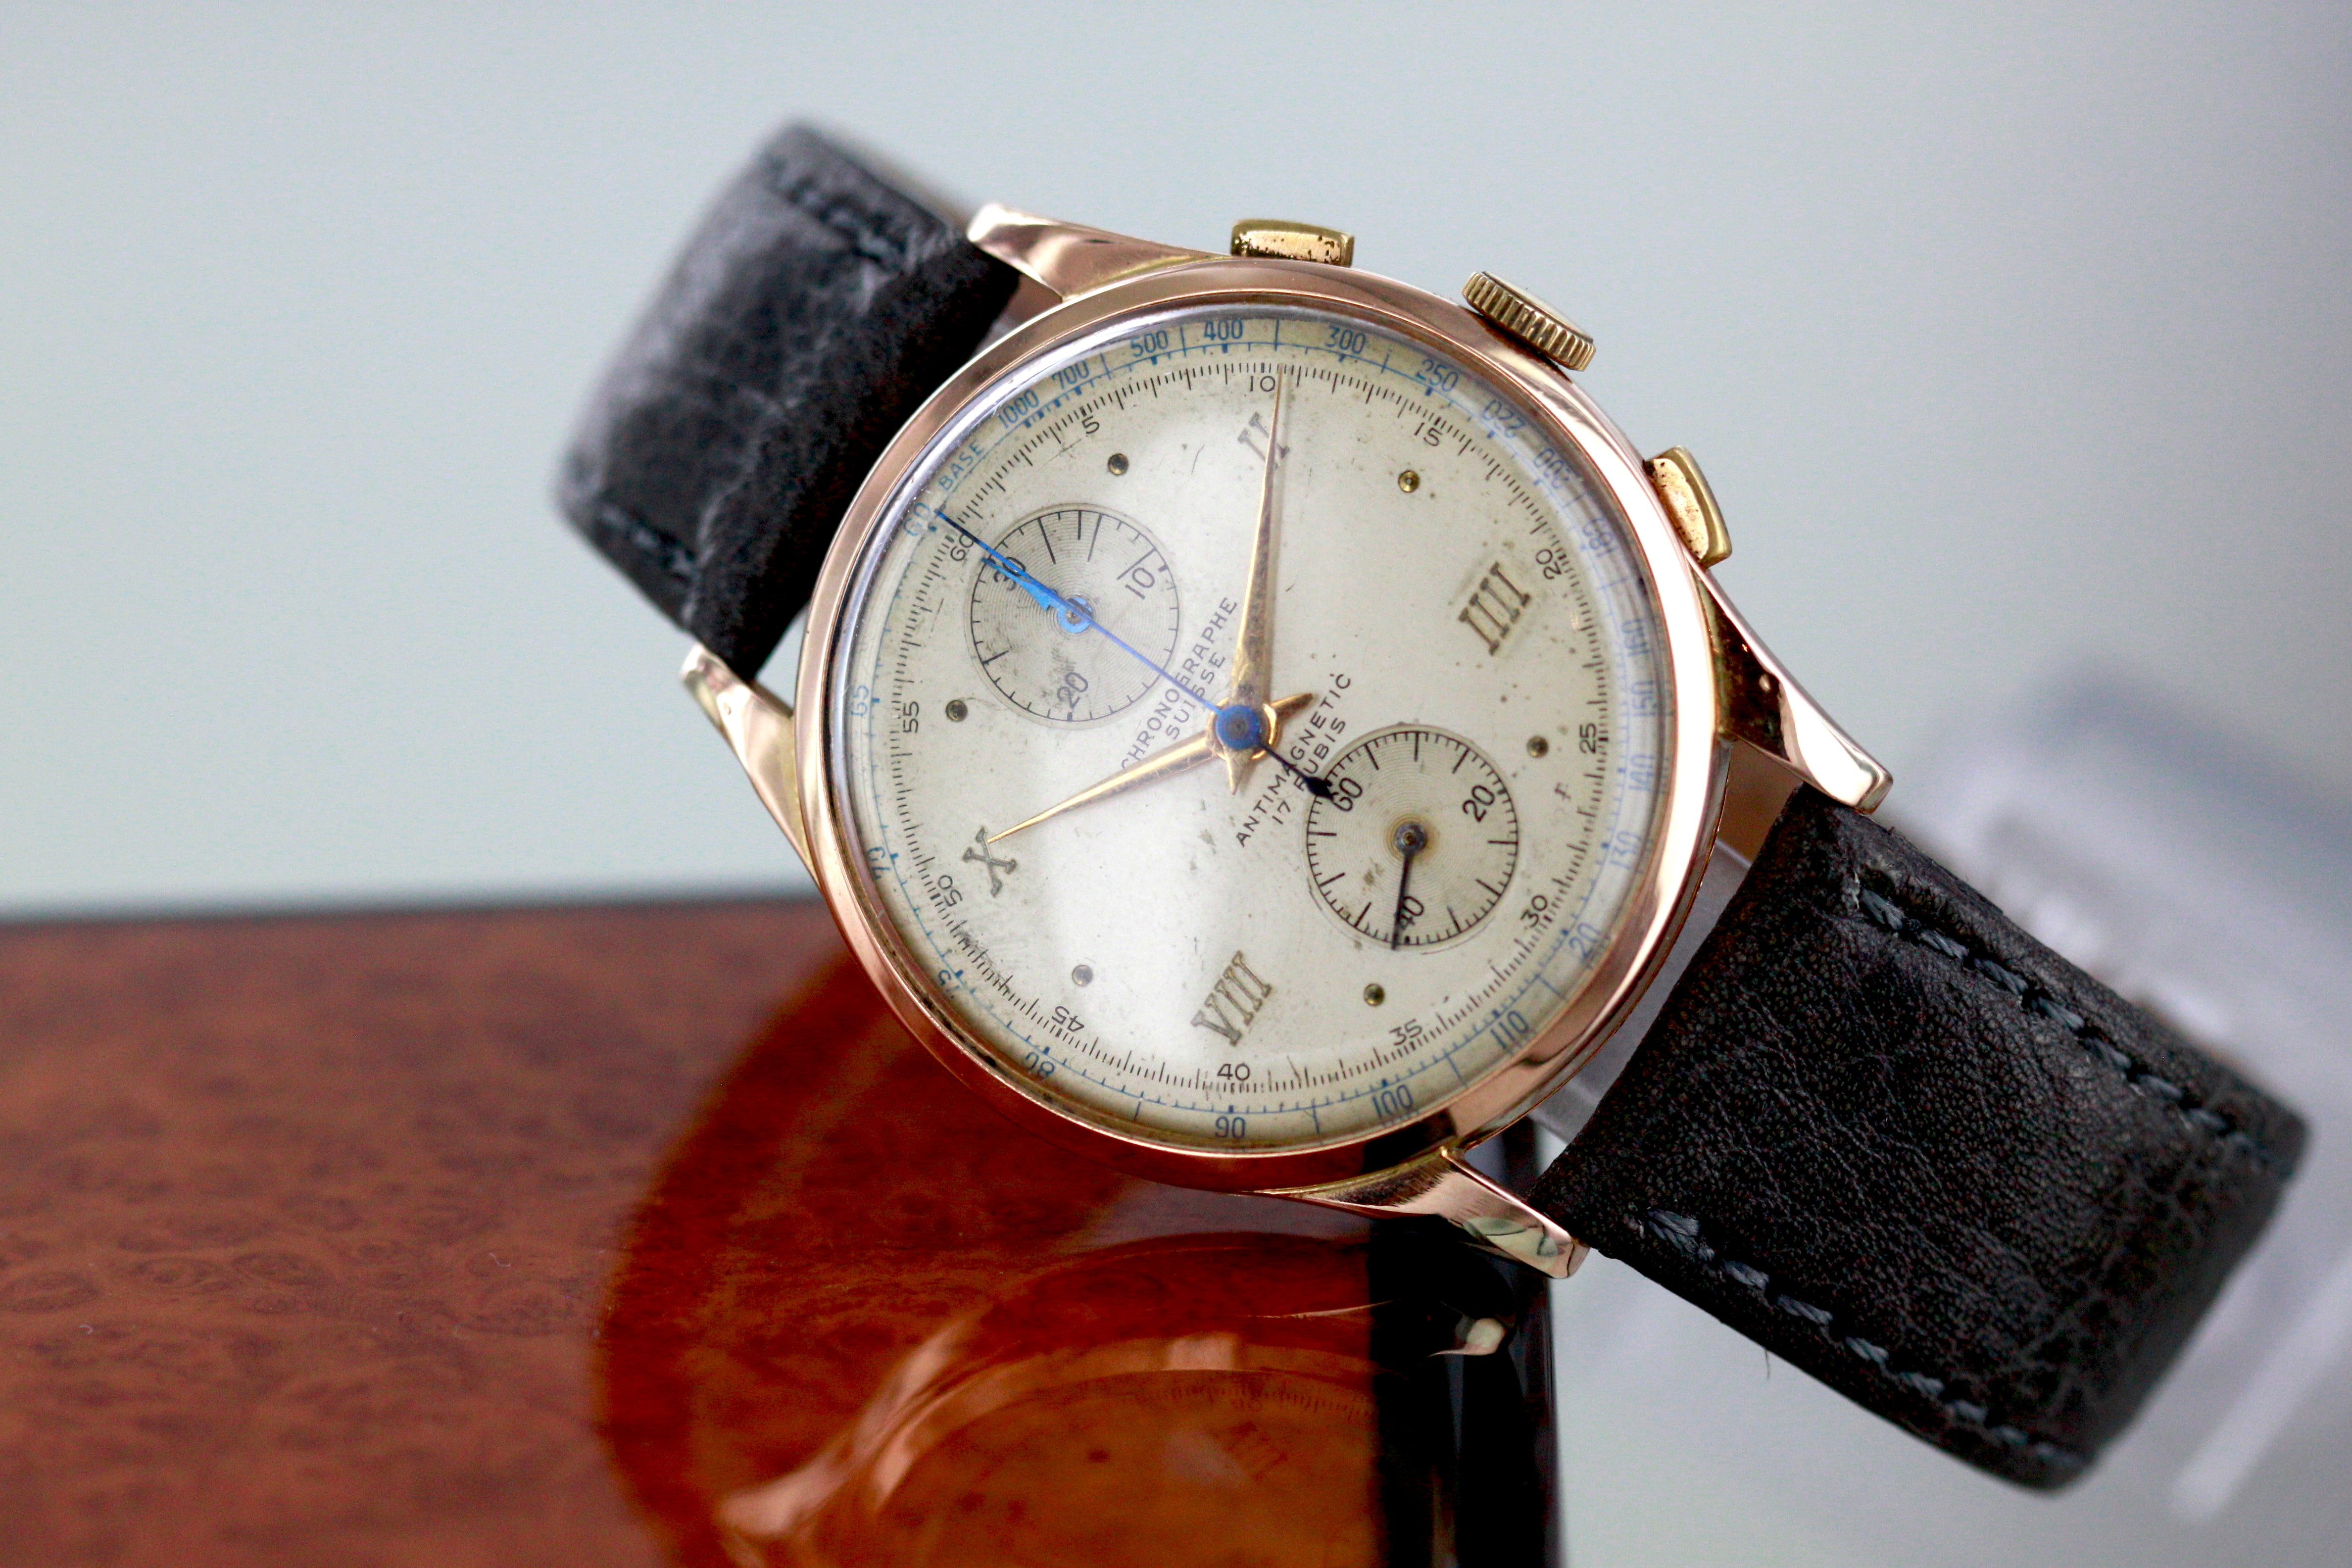 Chronographe suisse from the 40 s, Venus Caliber